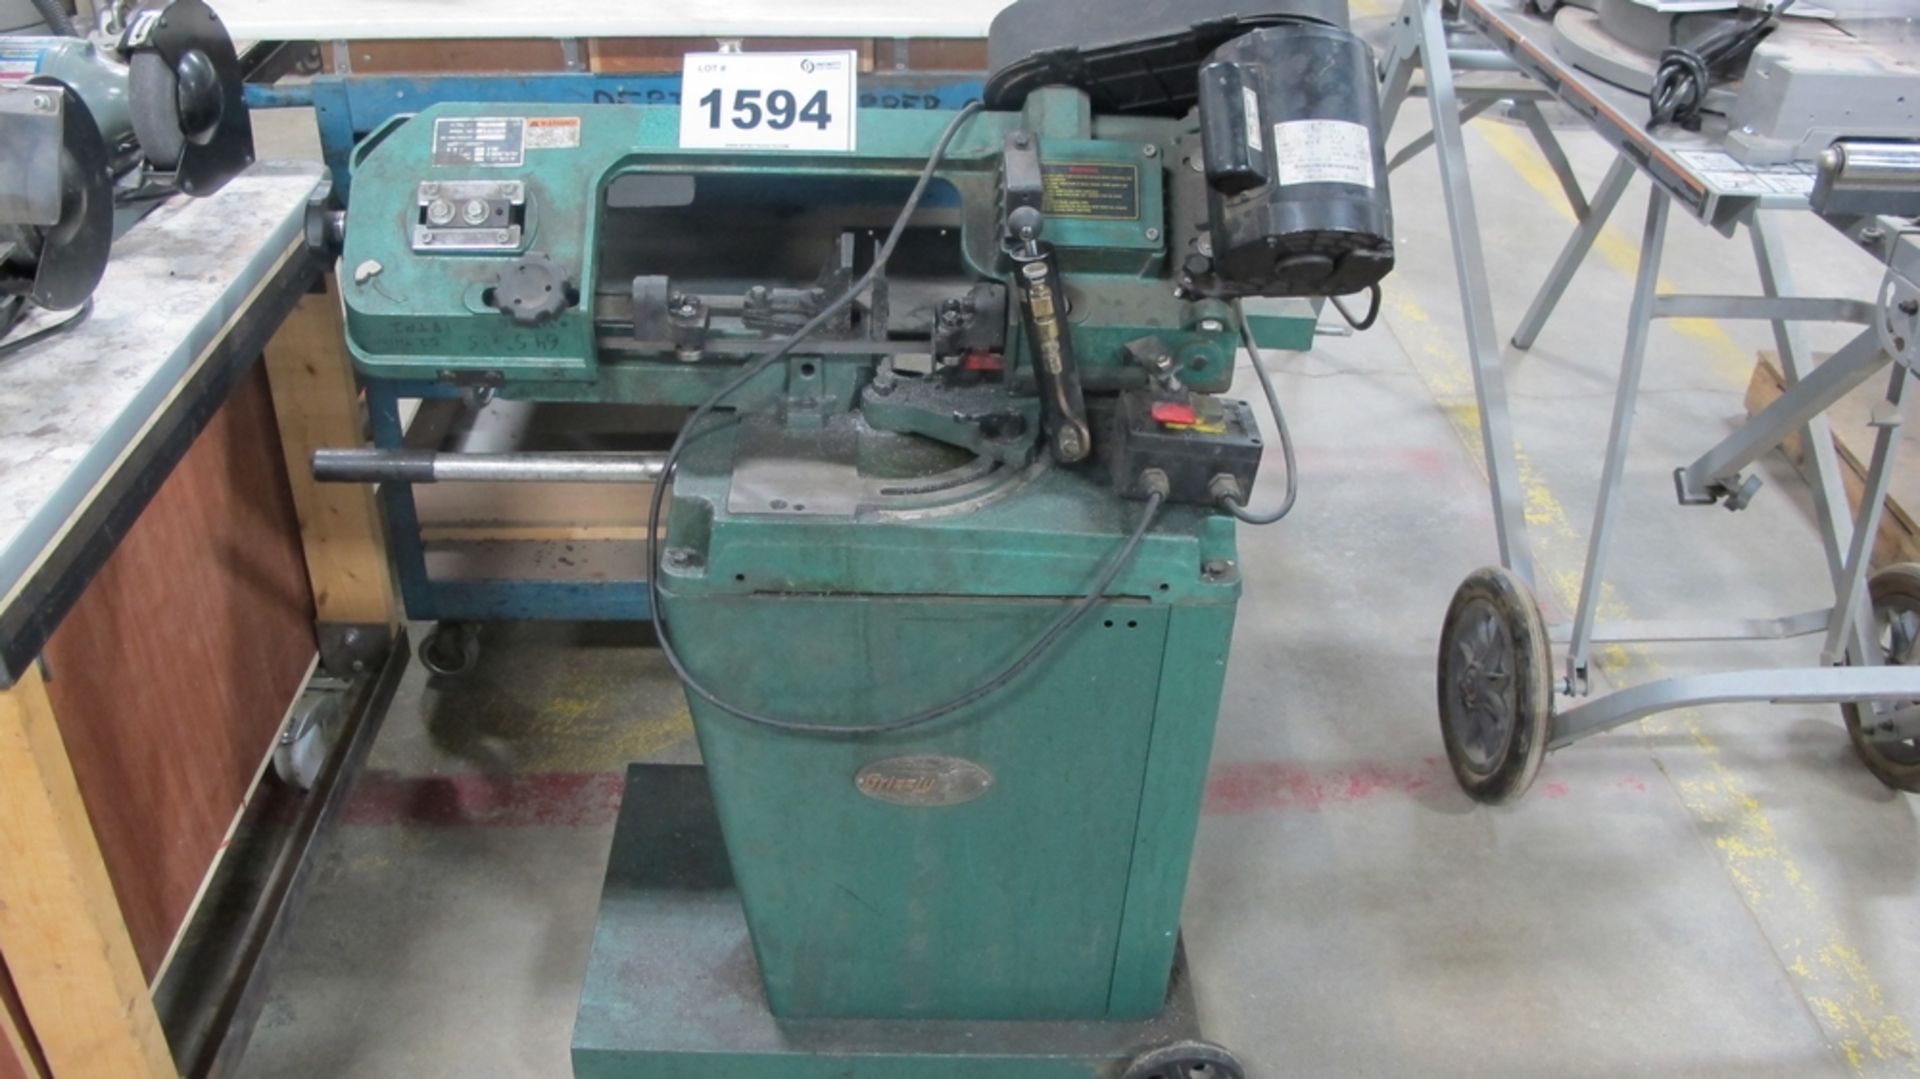 LOT OF GRIZZLY, MODEL 69742, HORIZONTAL BANDSAW, S/N 514629 (100 SHIRLEY AVE KITCHENER)